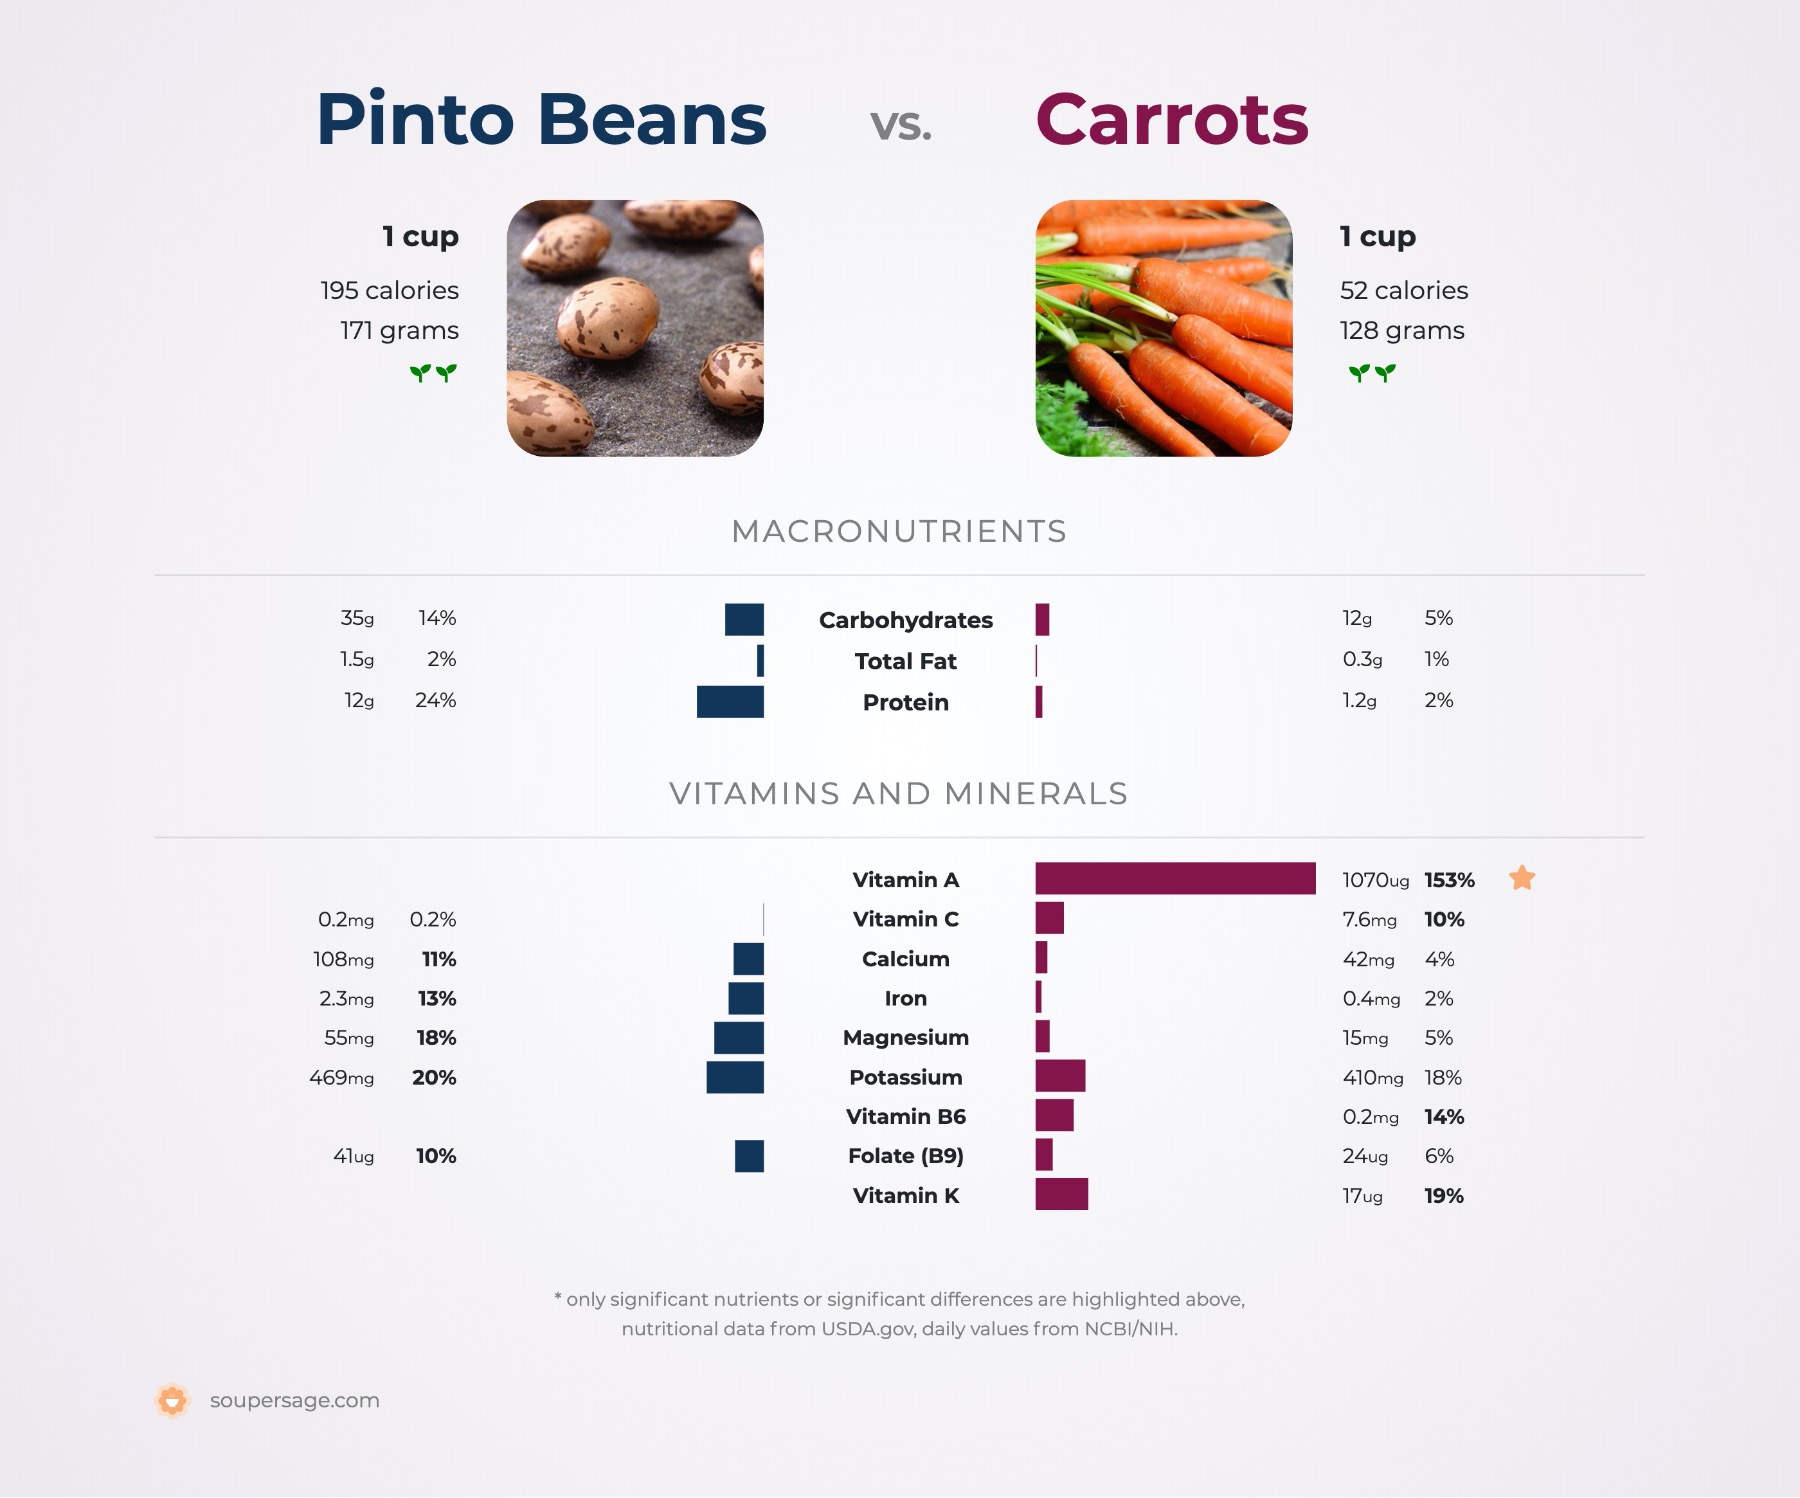 https://www.soupersage.com/css/img/pages/compare/pinto-beans-vs-carrots.jpg